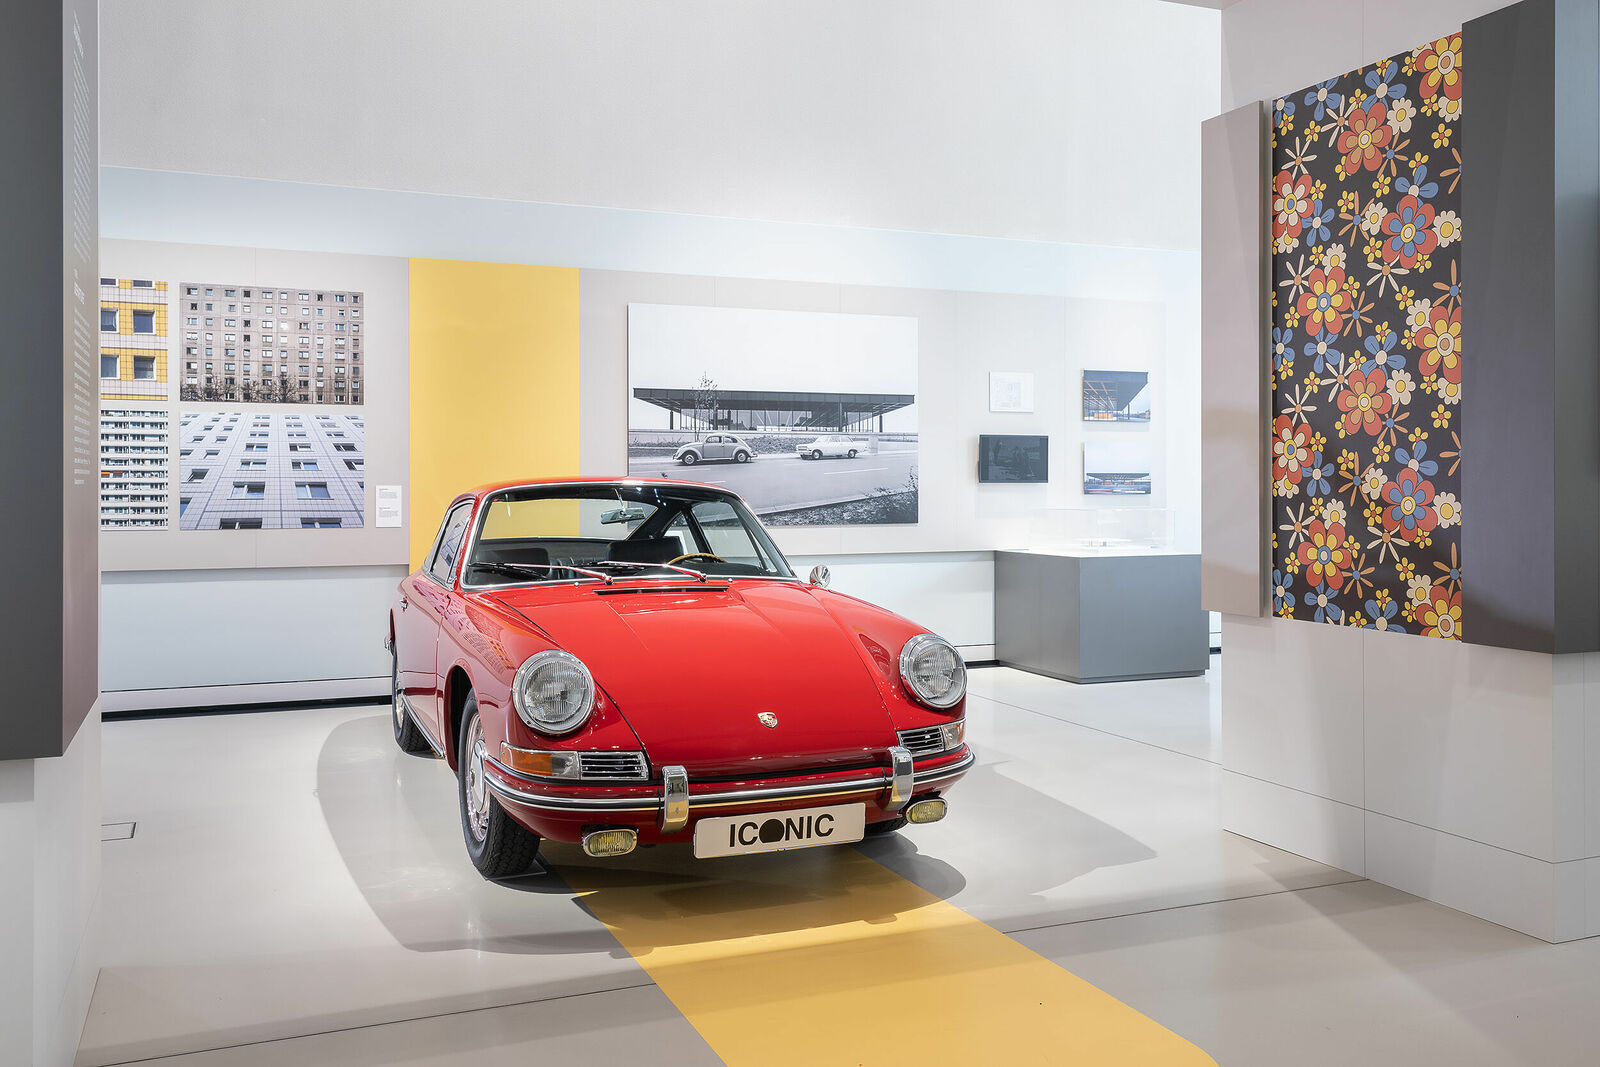 Neue Ausstellung im DRIVE: „ICONIC – A Timeless Journey of Culture, Society and Mobility”